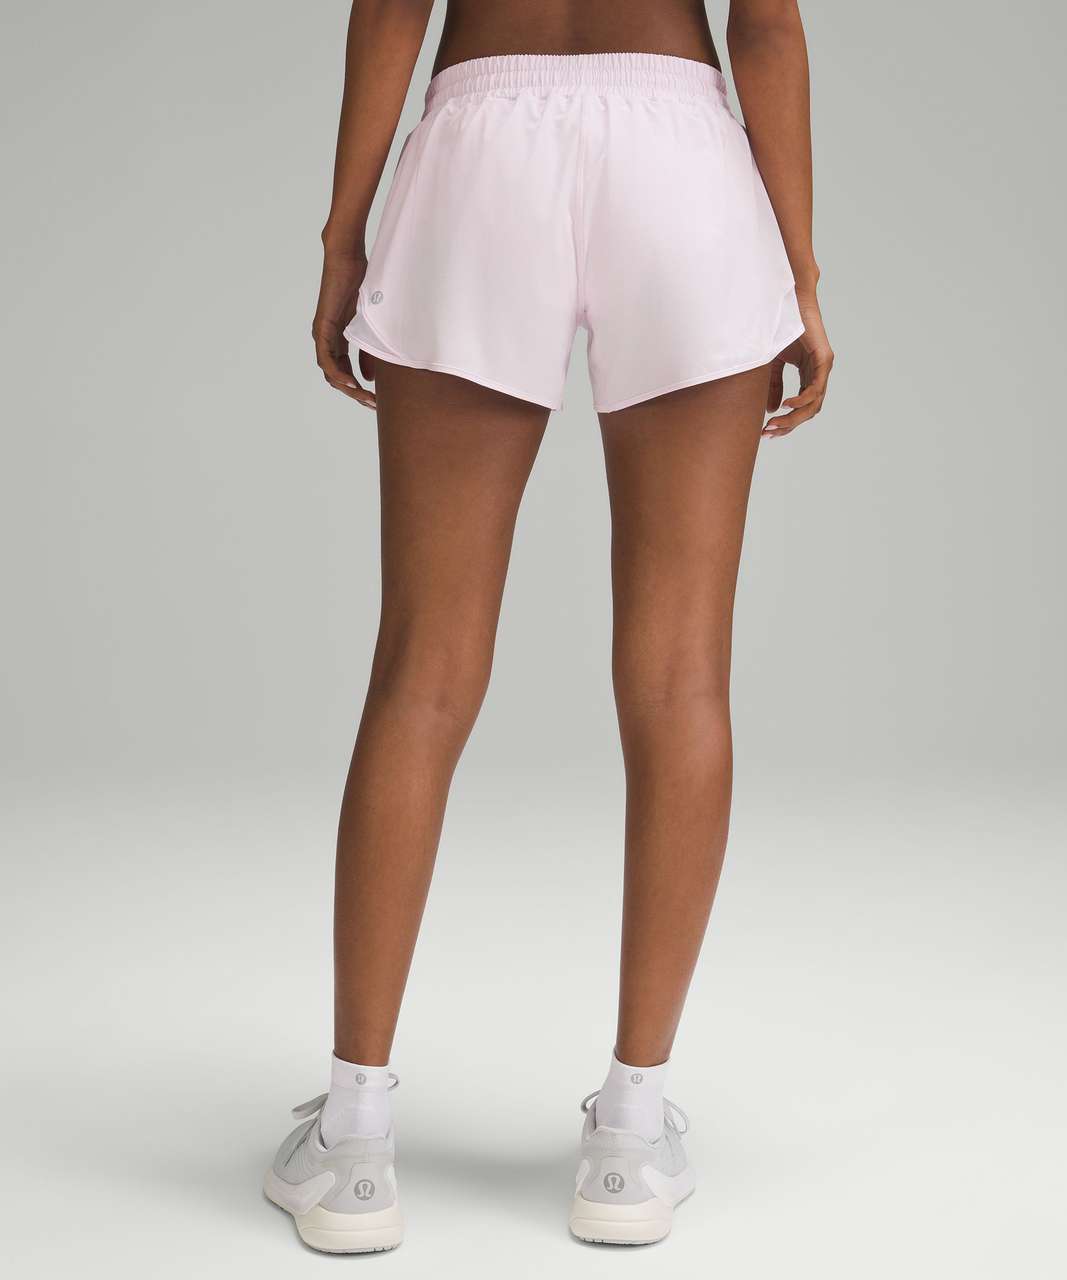 Lululemon Hotty Hot Low-Rise Lined Short 4" - Meadowsweet Pink